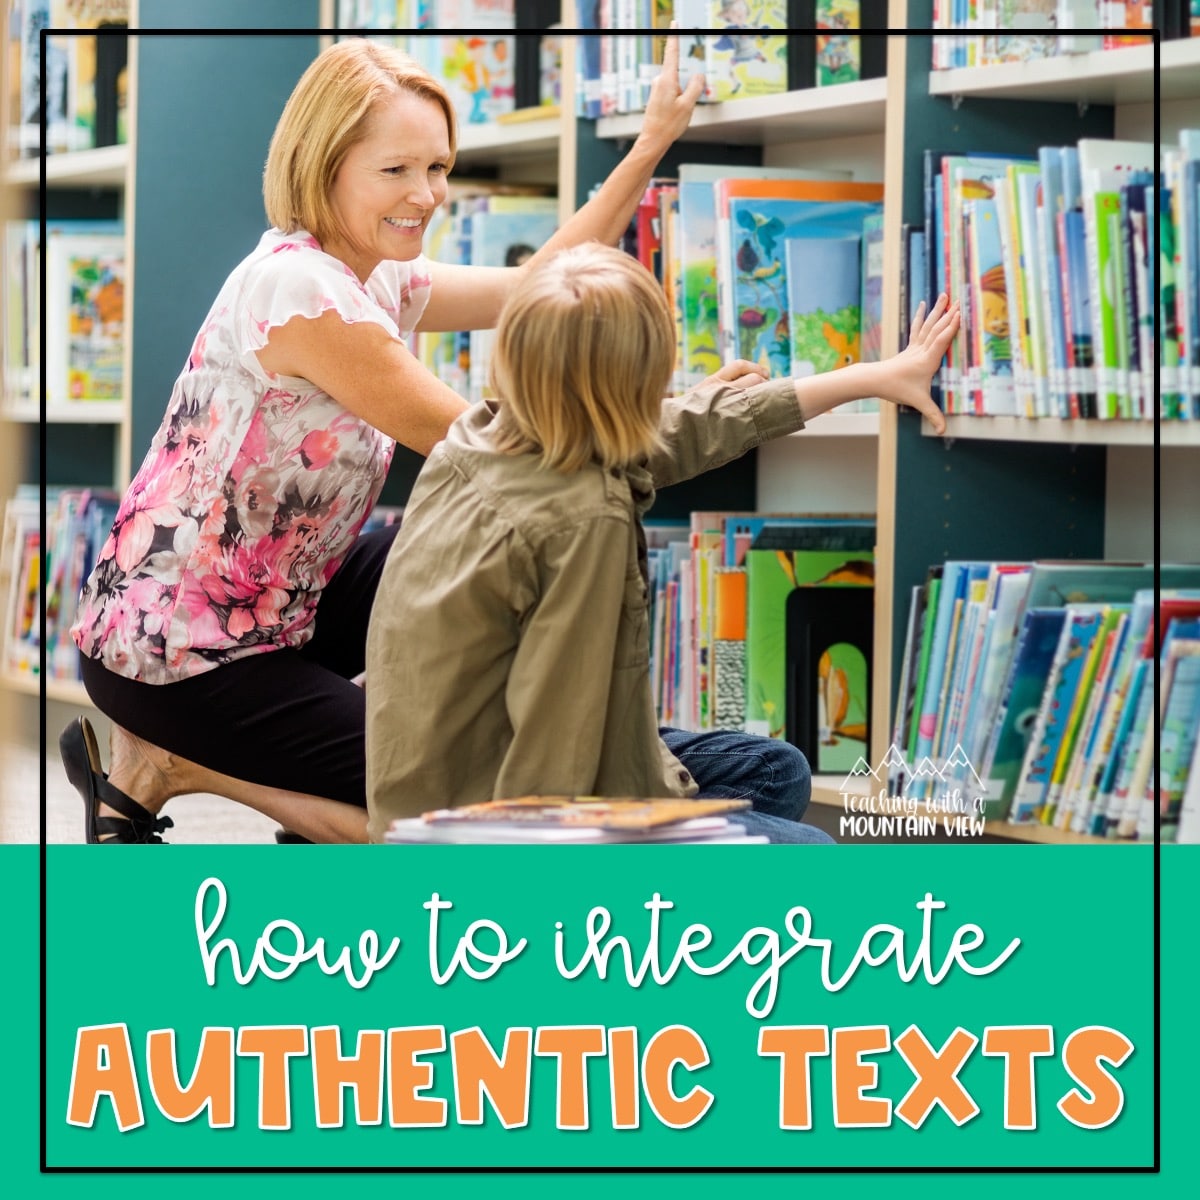 Upper elementary tips and resources to help you provide engaging instruction and meet all students' needs using authentic texts